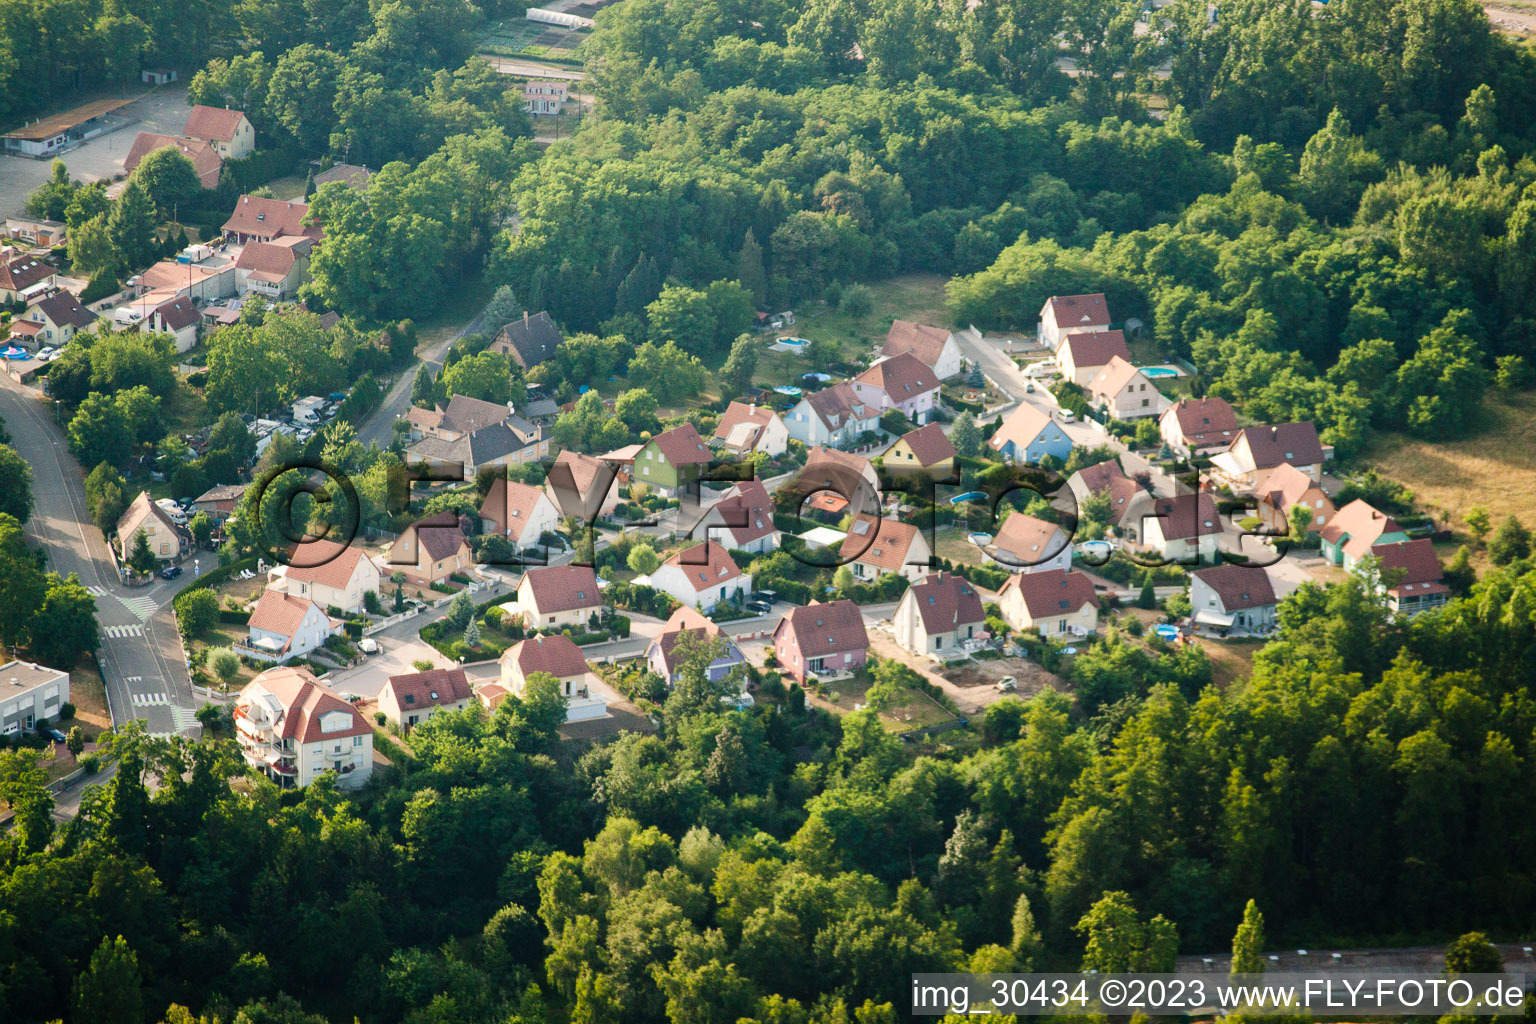 Bischwiller in the state Bas-Rhin, France from above